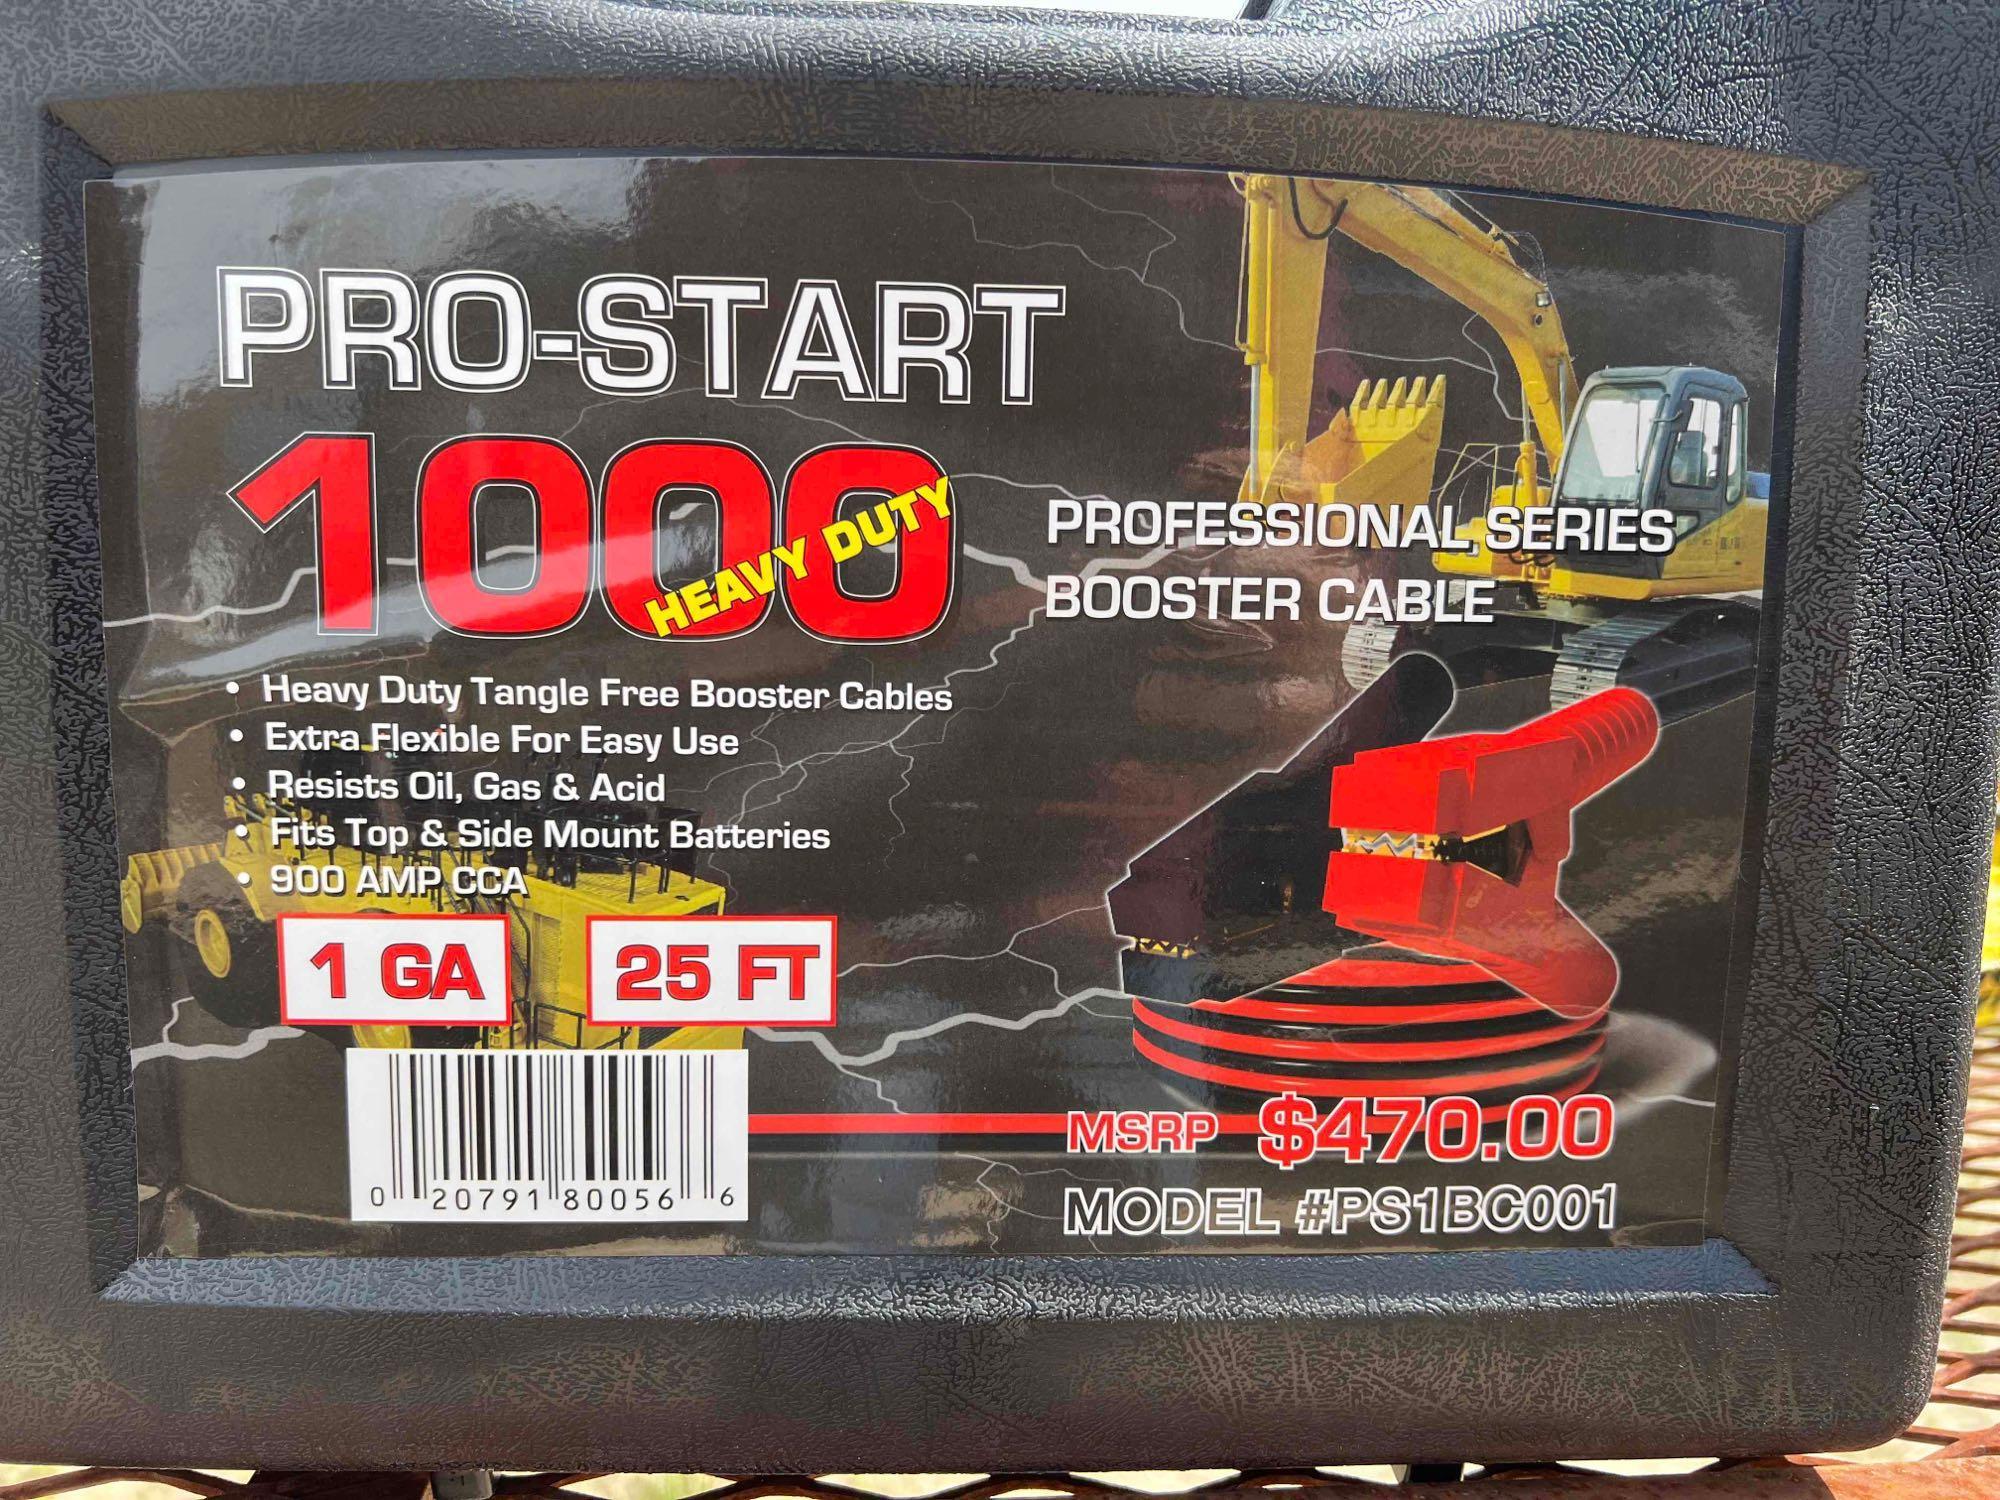 (1) NEW PRO-START 1000 HD BOOSTER CABLES 1 GA CASE